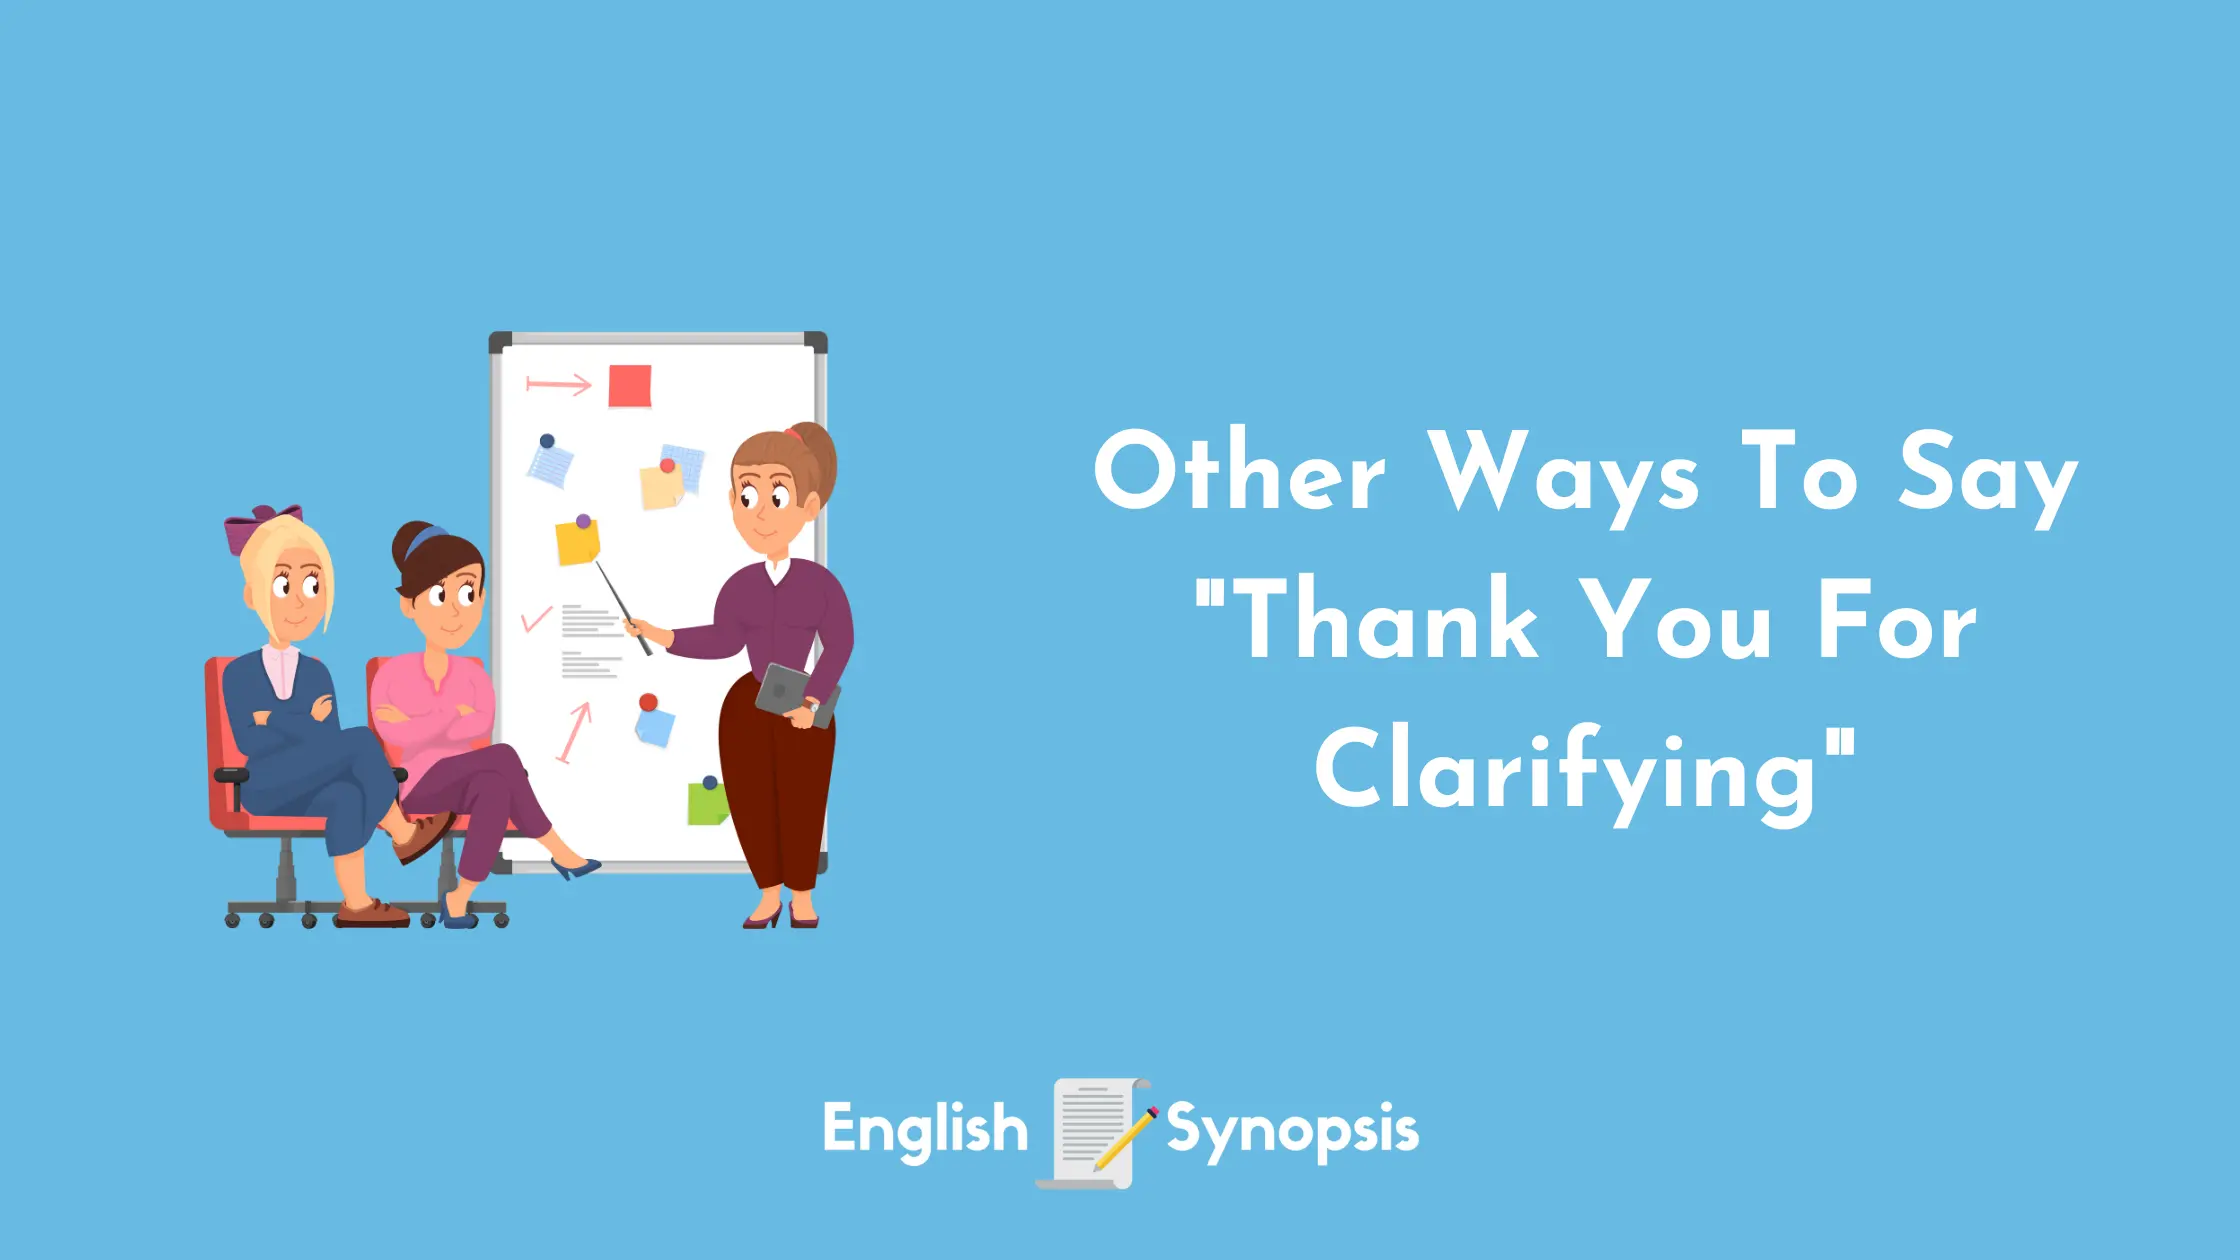 Other Ways To Say "Thank You for Clarifying"